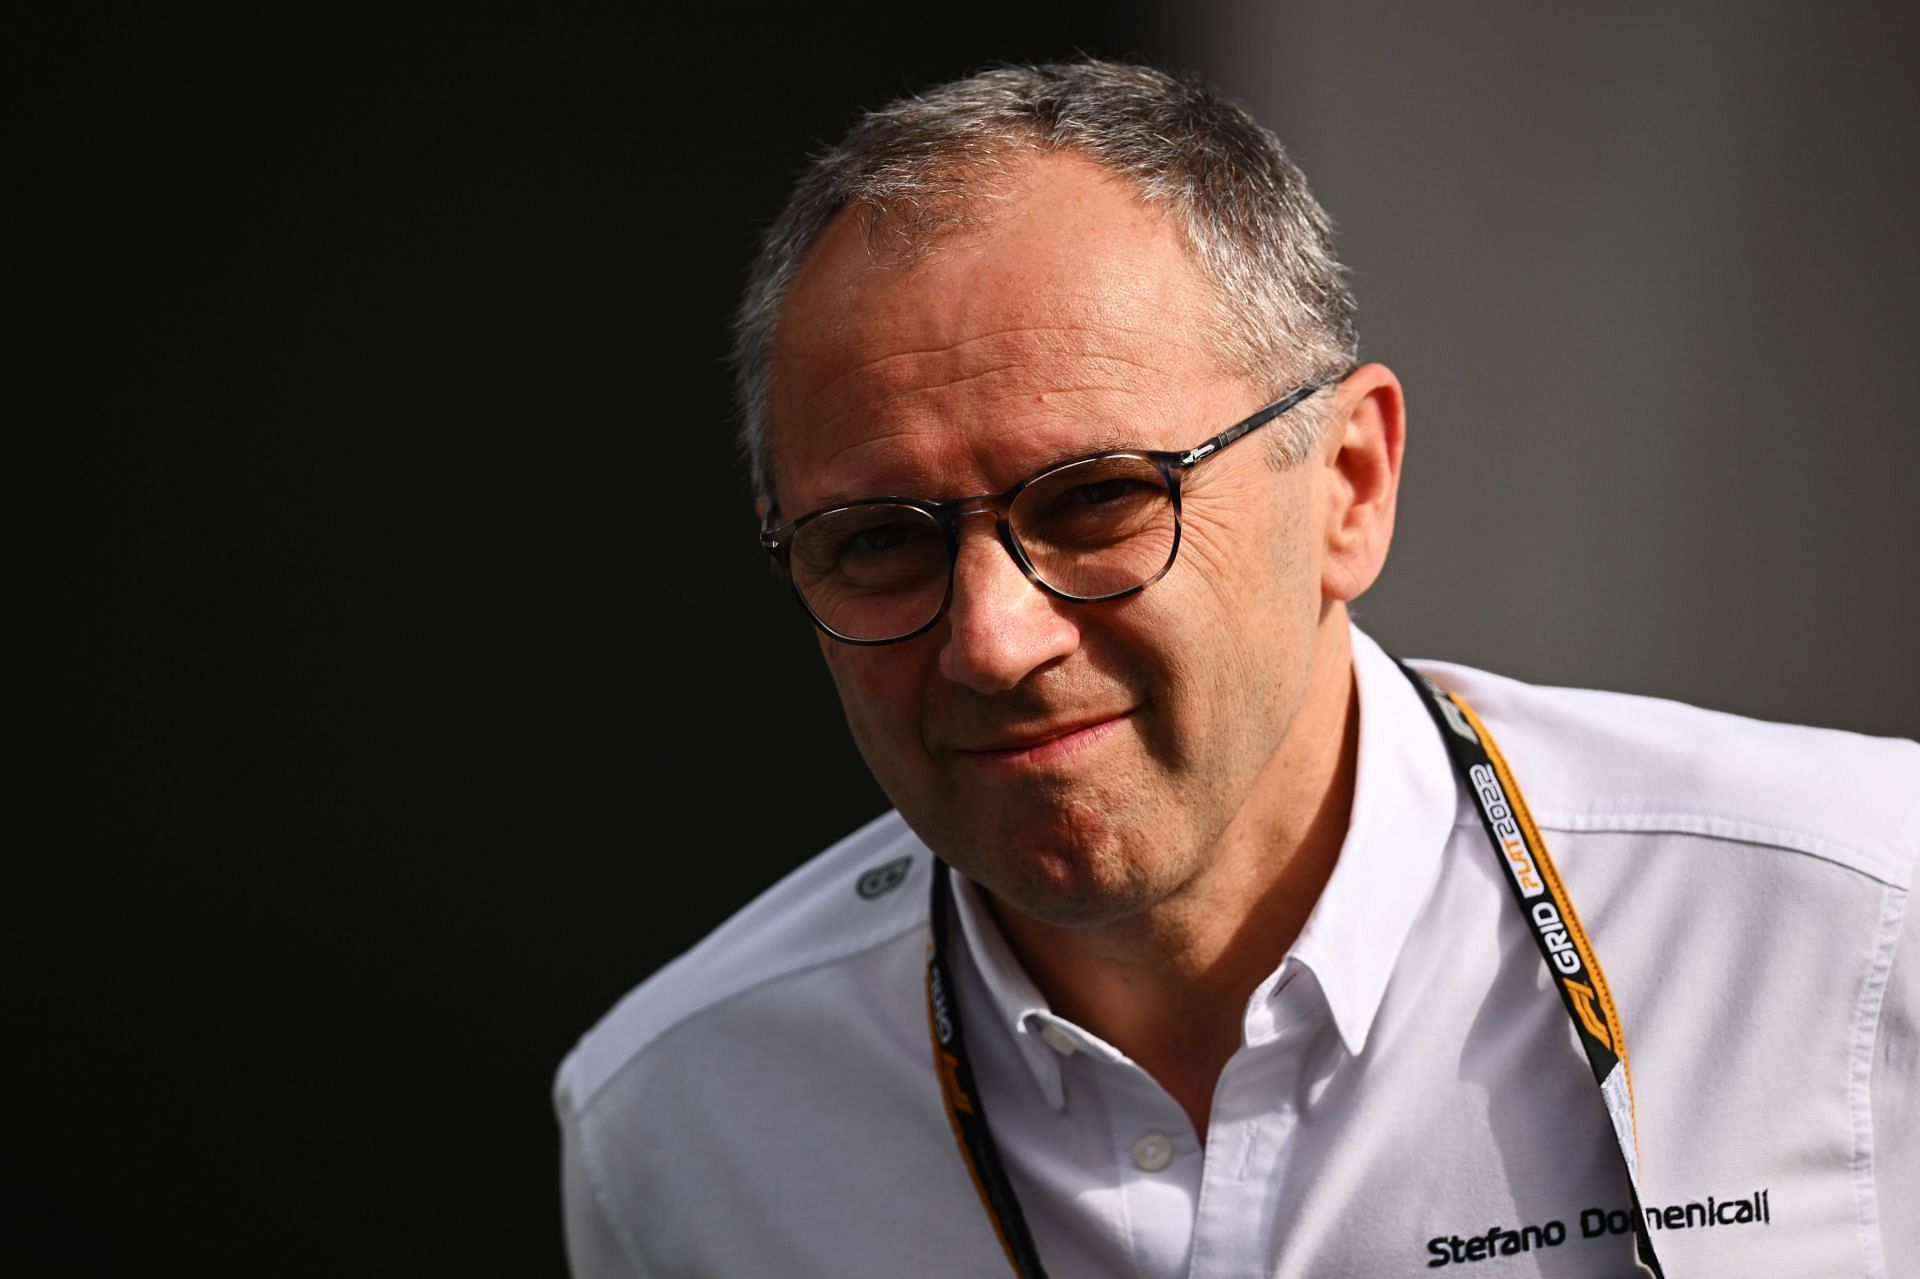 F1 CEO Stefano Domenicali photographed in the paddock at the Jeddah Corniche Circuit during the 2022 F1 Saudi Arabian GP. (Photo by Clive Mason/Getty Images)